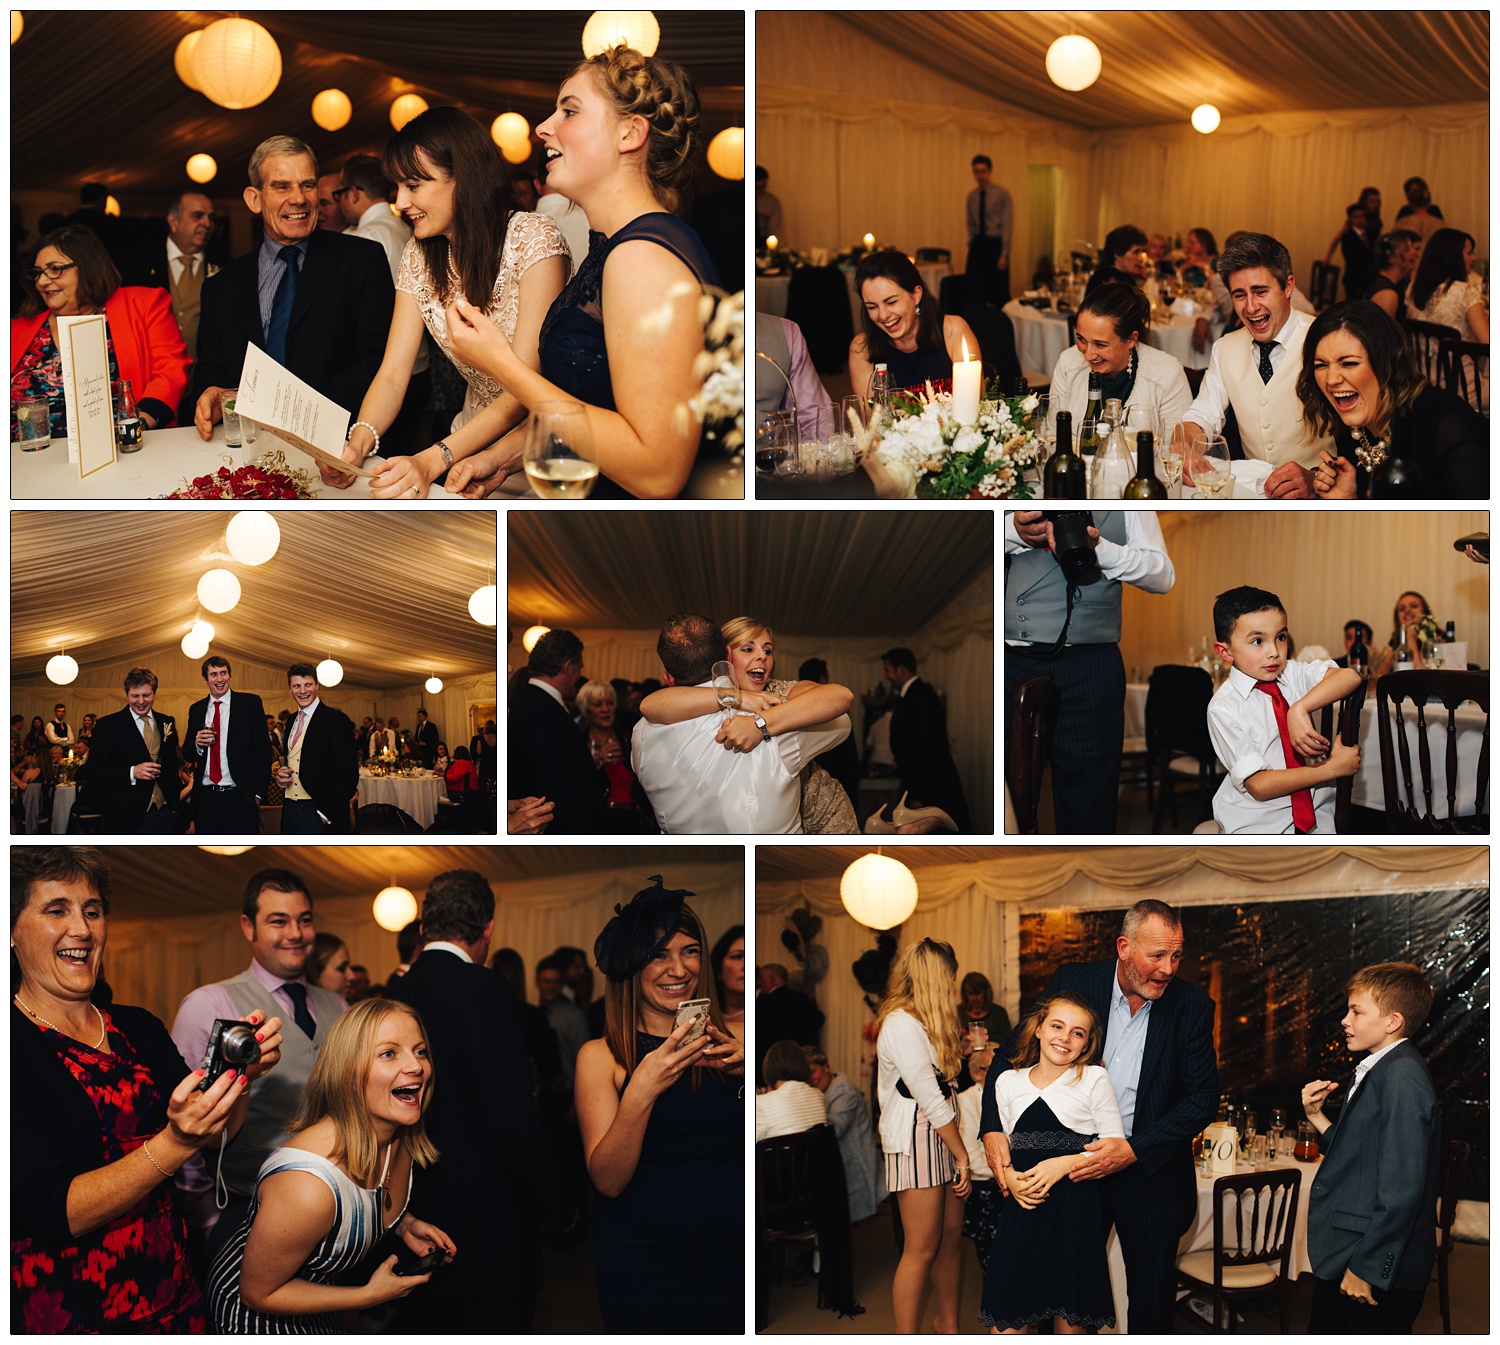 a selection of candid wedding photographs of guests enjoying themselves. Dancing, hugging and laughing. The lighting in the marquee is orange.